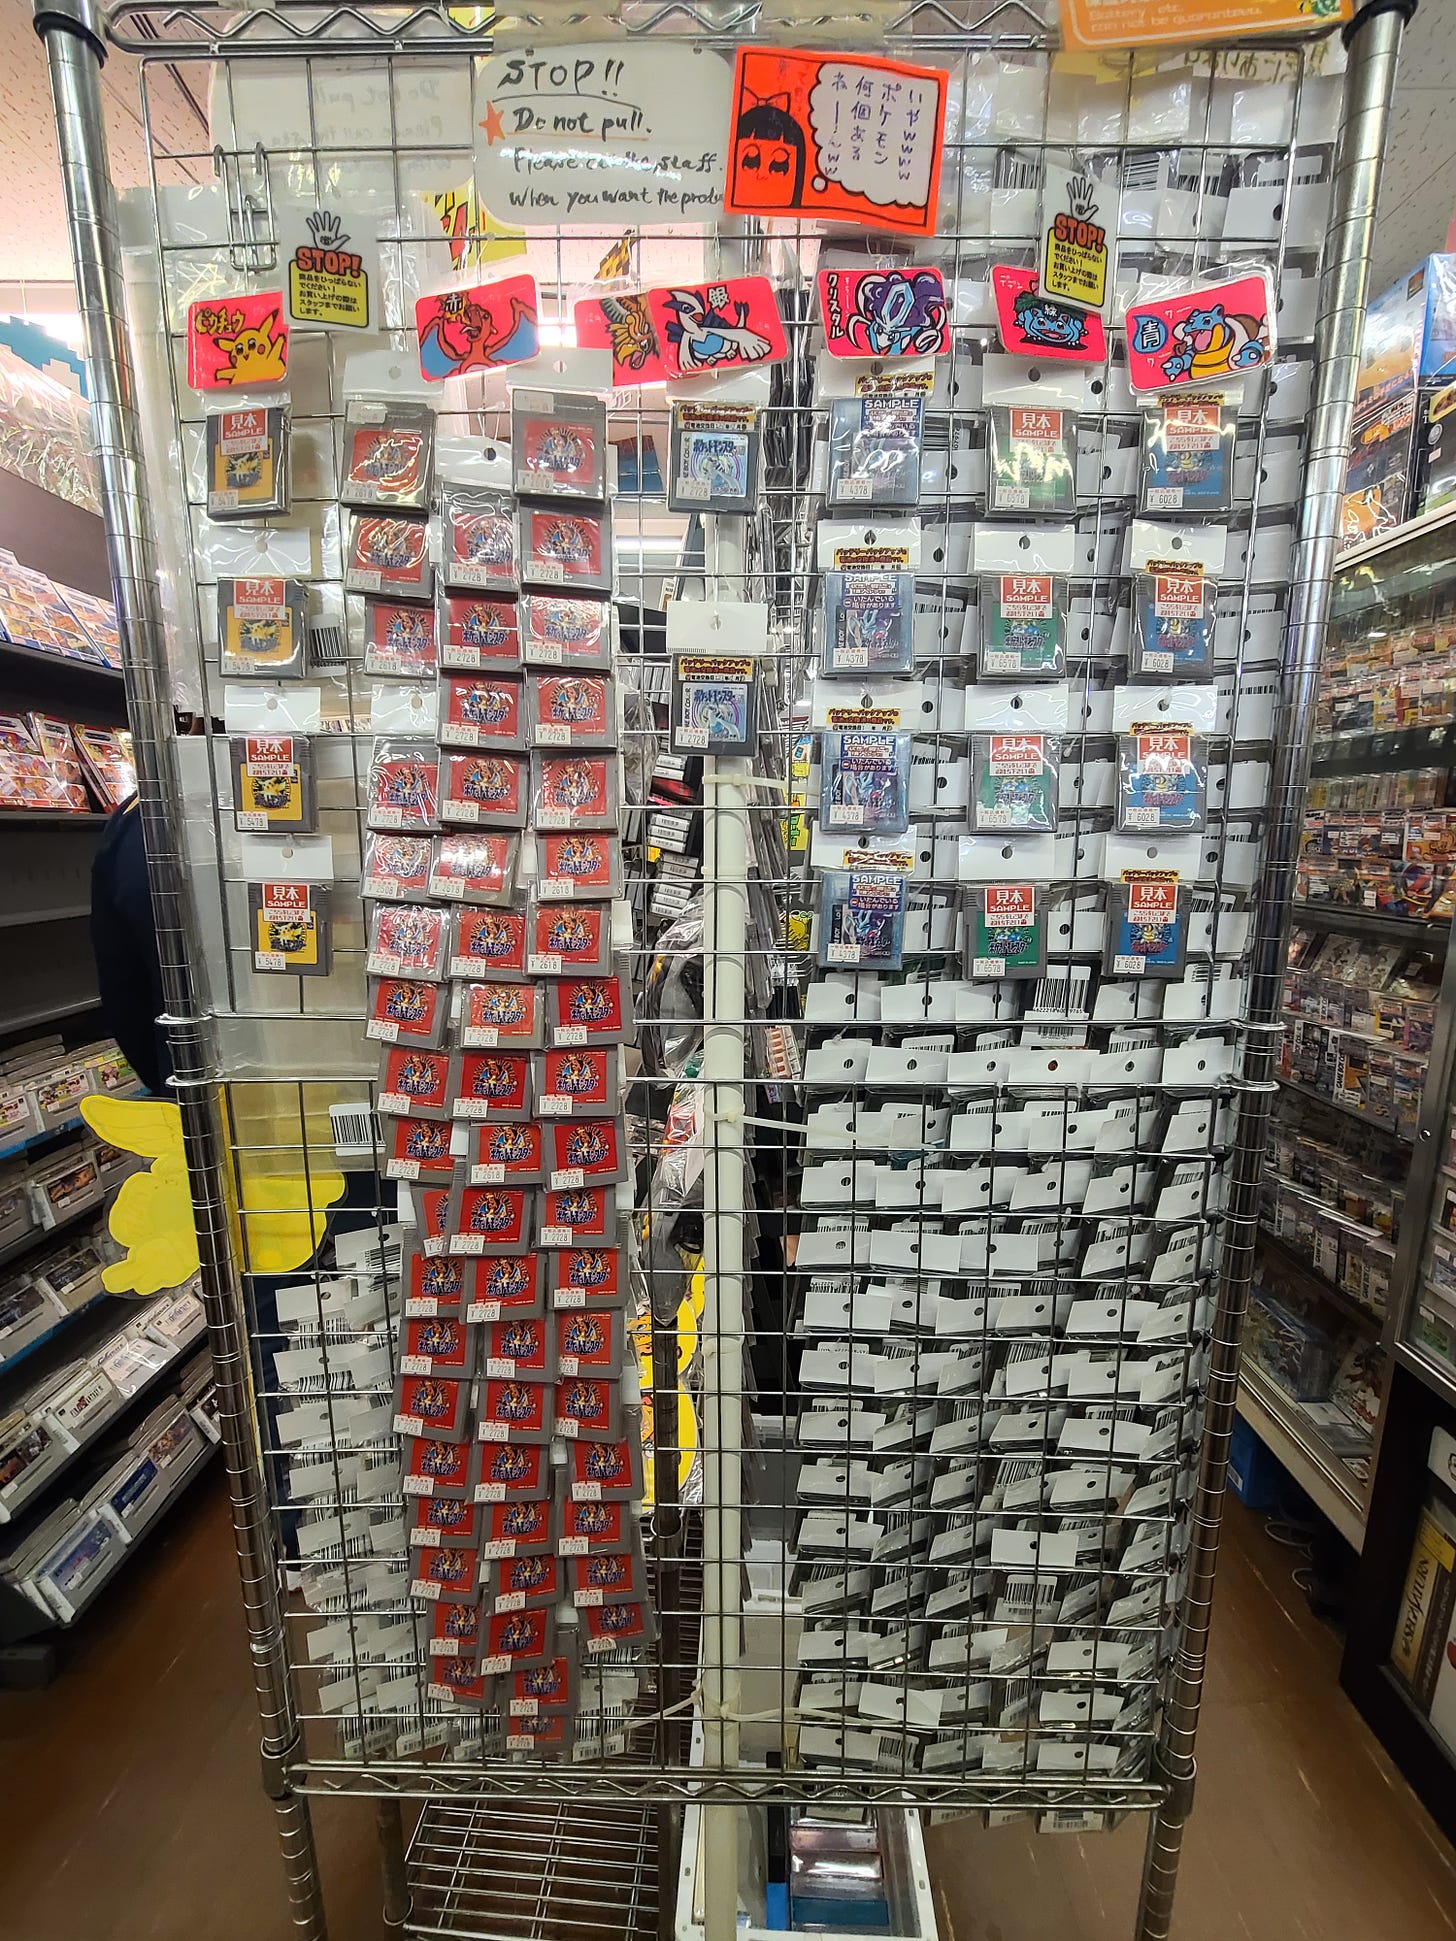 Have you ever seen so many used copies of Pokémon games in one place?